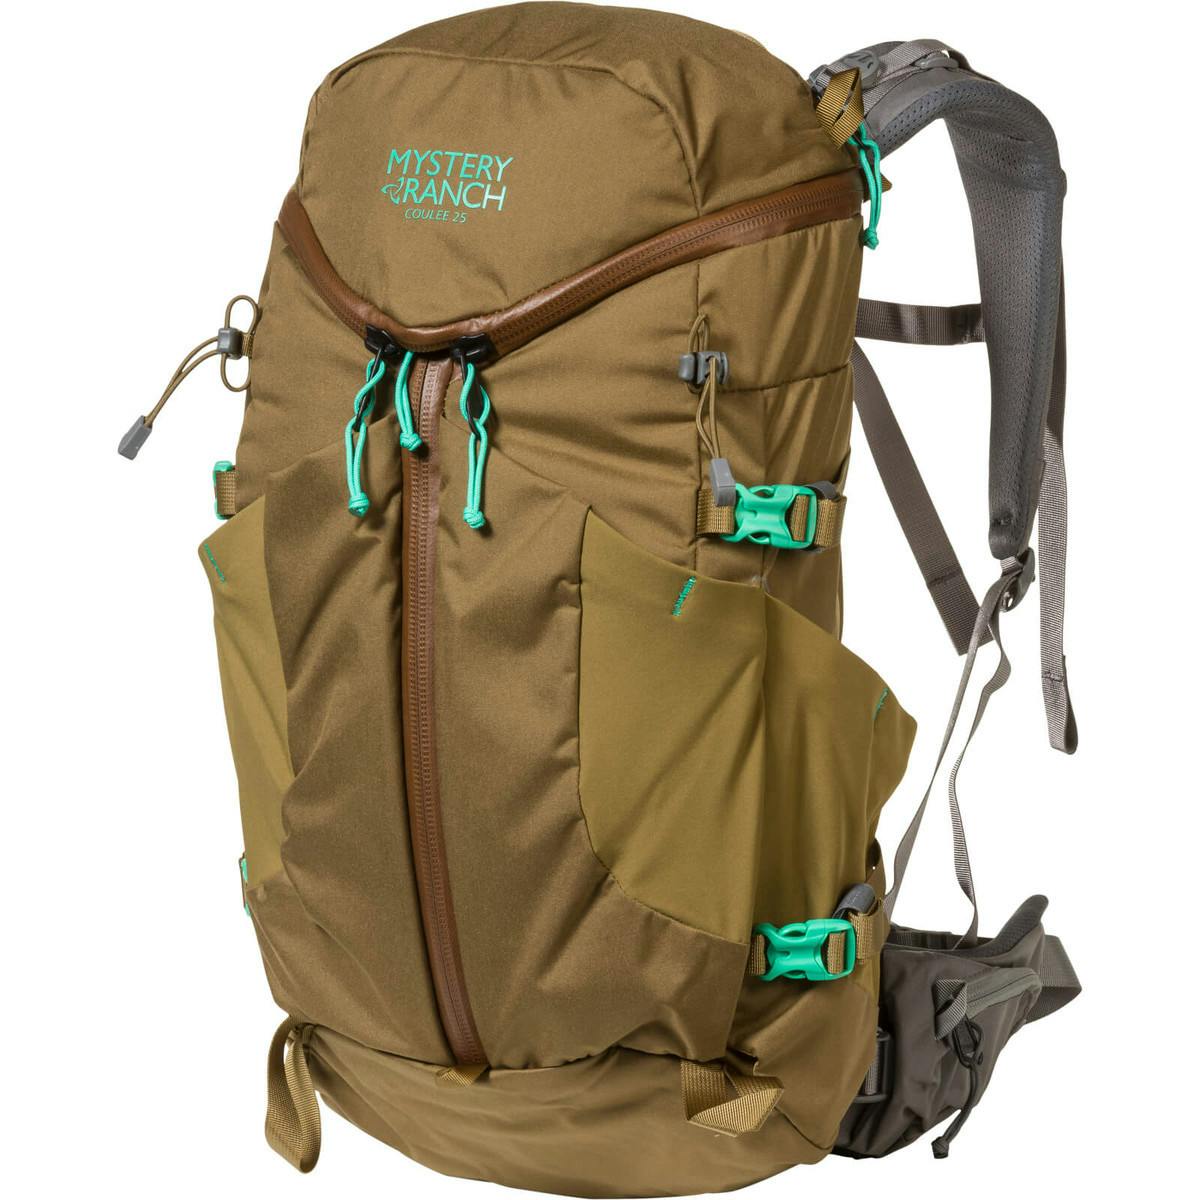 Mystery Ranch Coulee 25 Backpack- Women's 